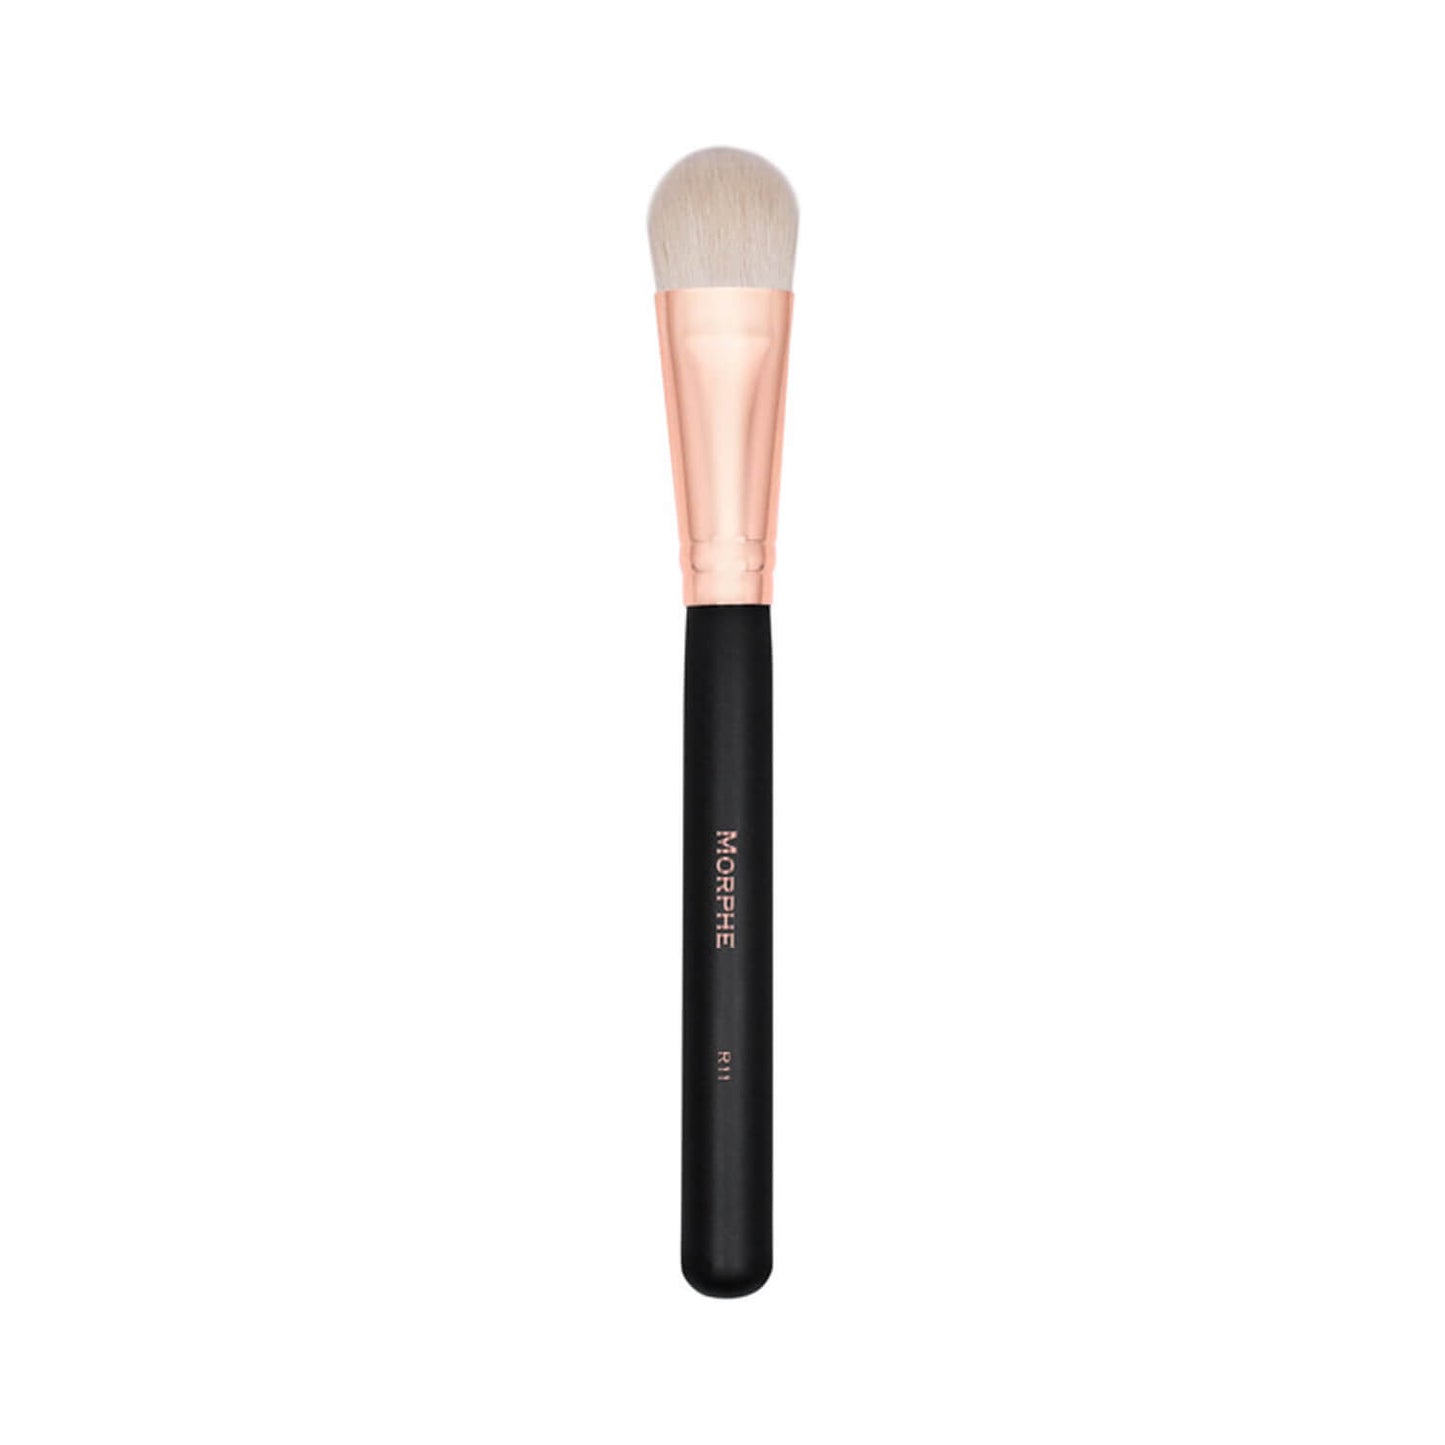 Morphe Cosmetics R11 Deluxe Oval Shadow Brush